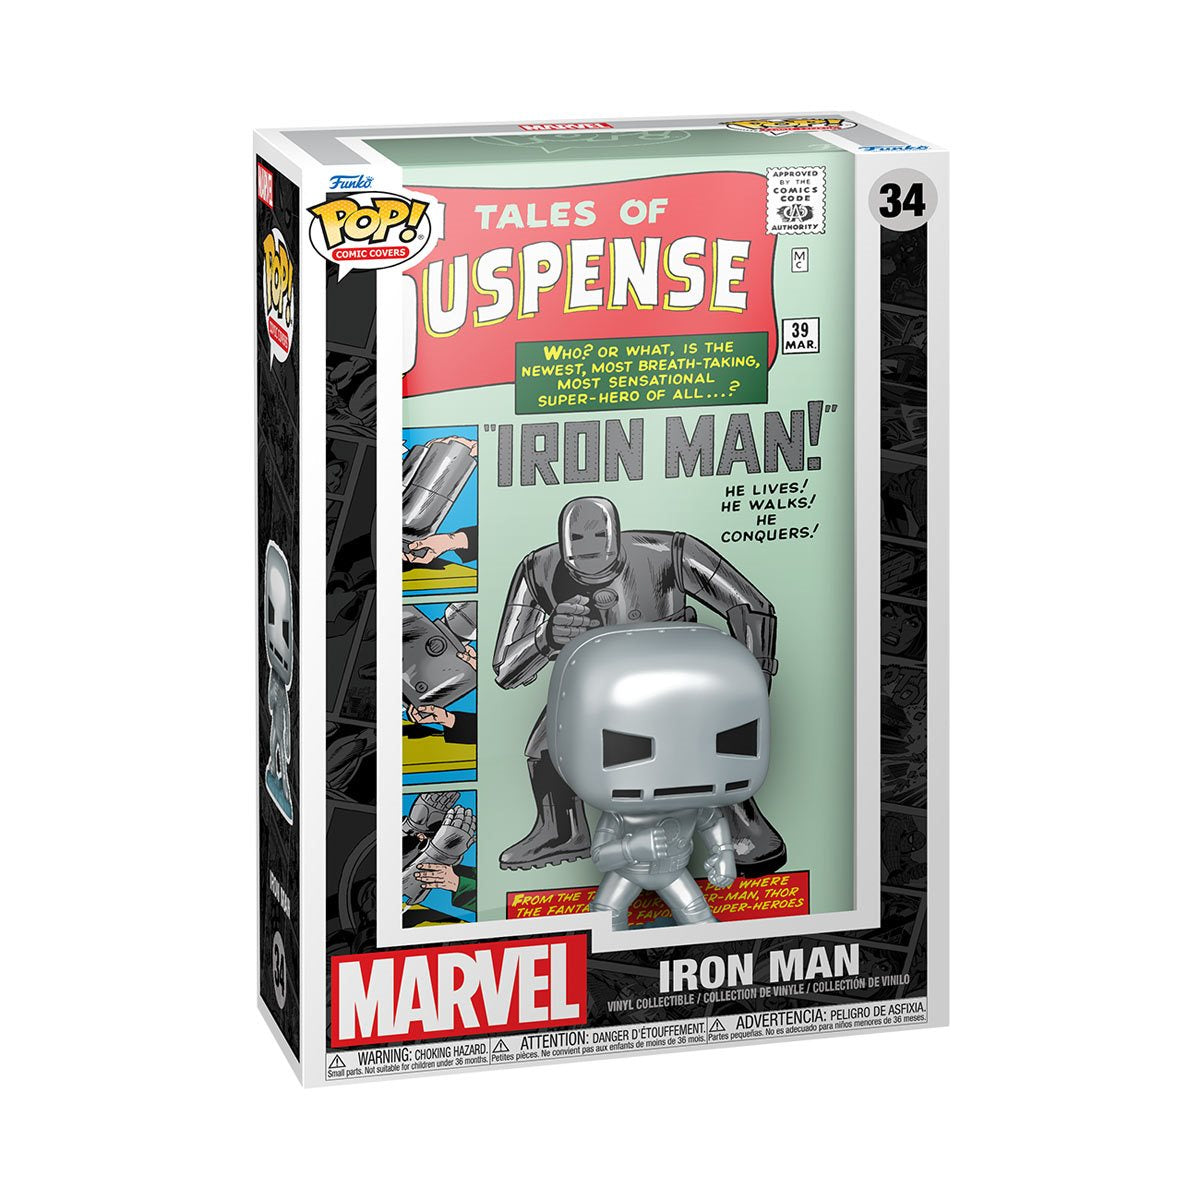 Funko Marvel Tales of Suspense #39 Pop! Comic Cover Figure #34 with Case